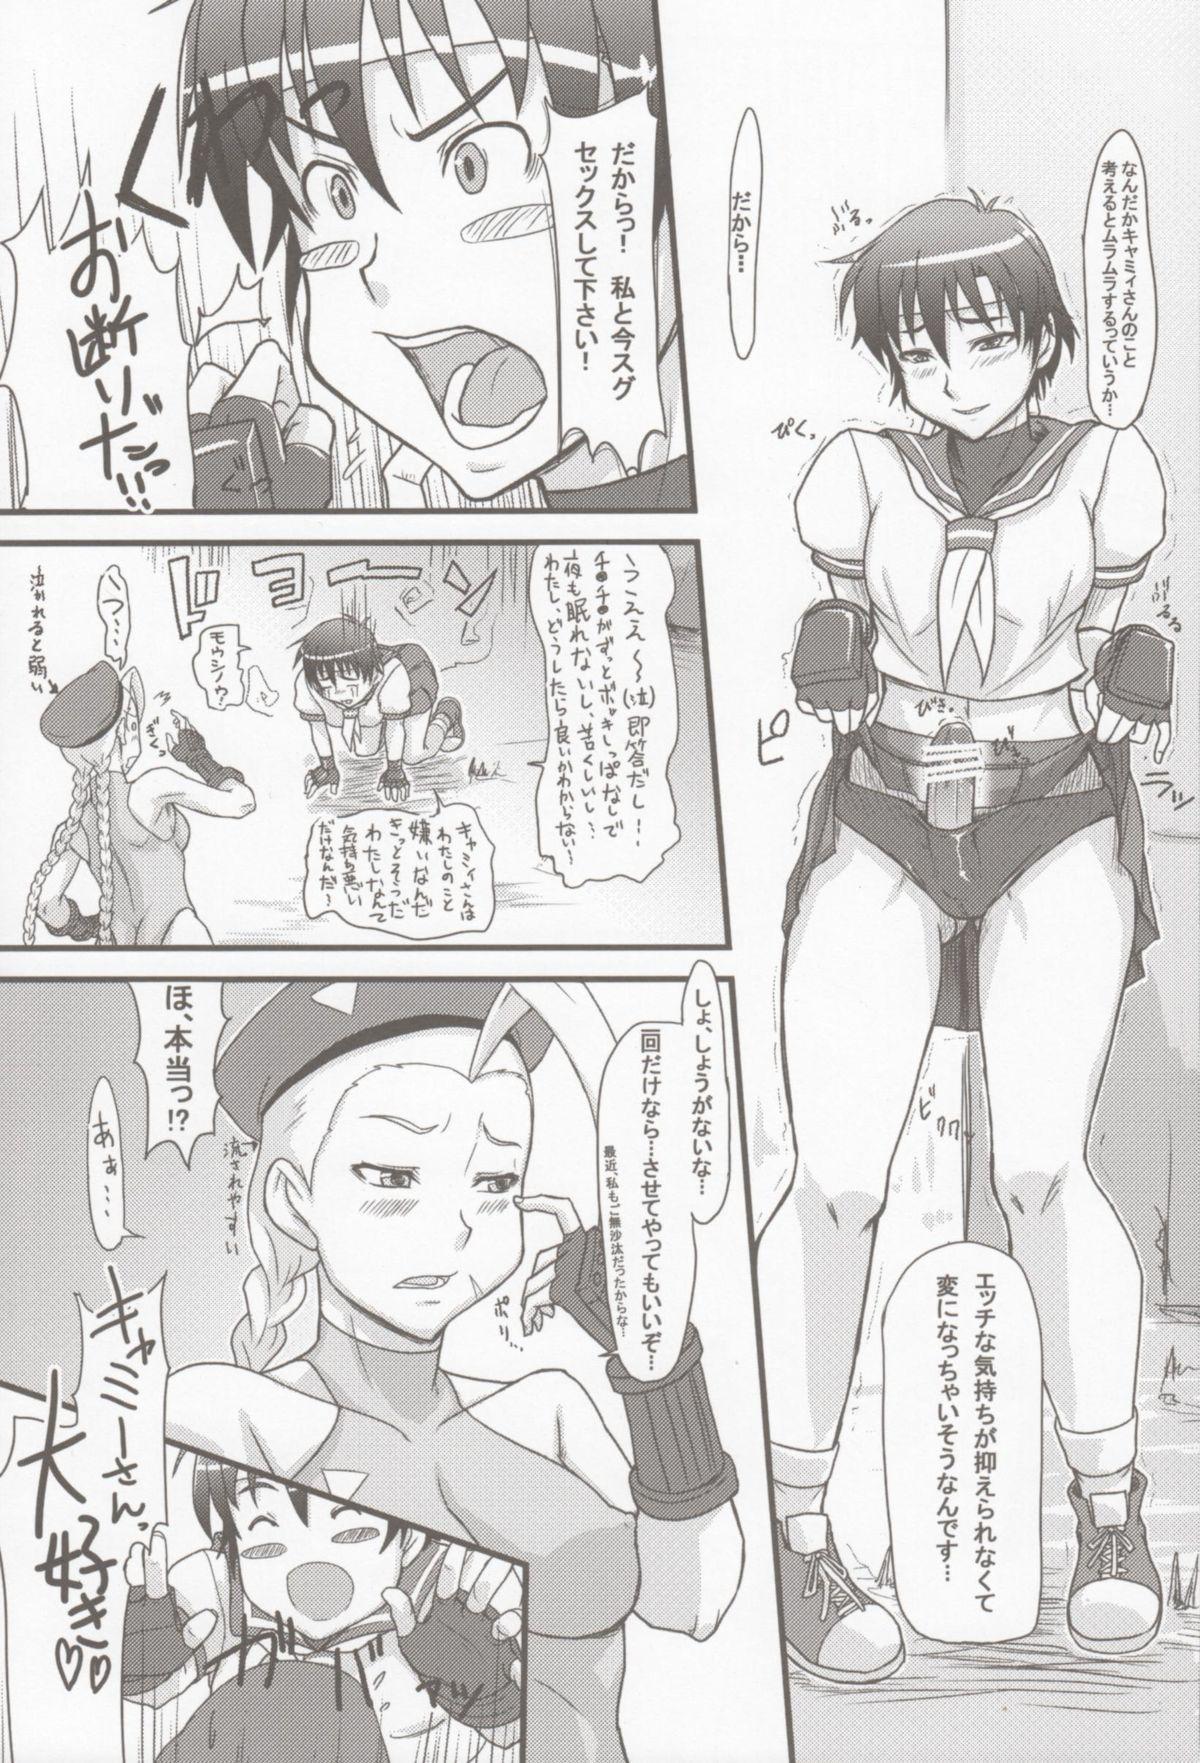 Peluda Cammy Saku! Fighter Material Vol. 2 - Street fighter Swallowing - Page 8